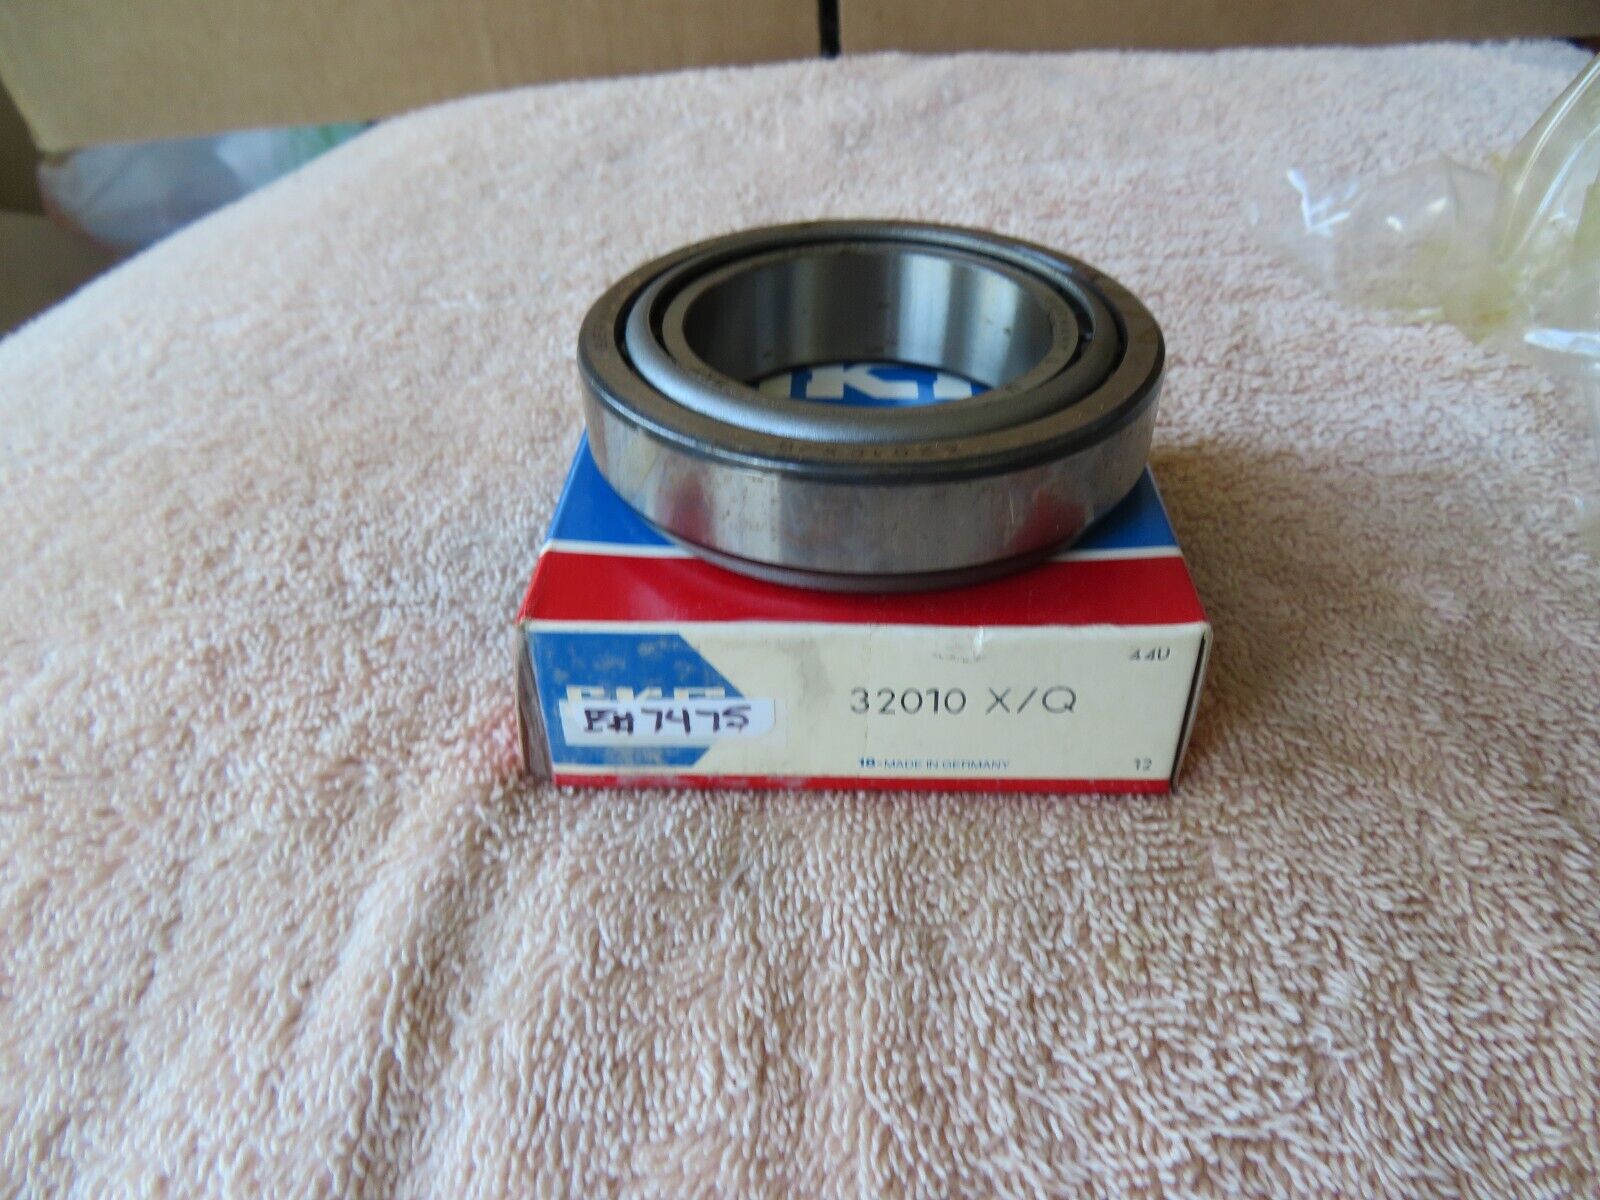 SKF 50 mm Tapered Roller Bearing 32010 X/Q